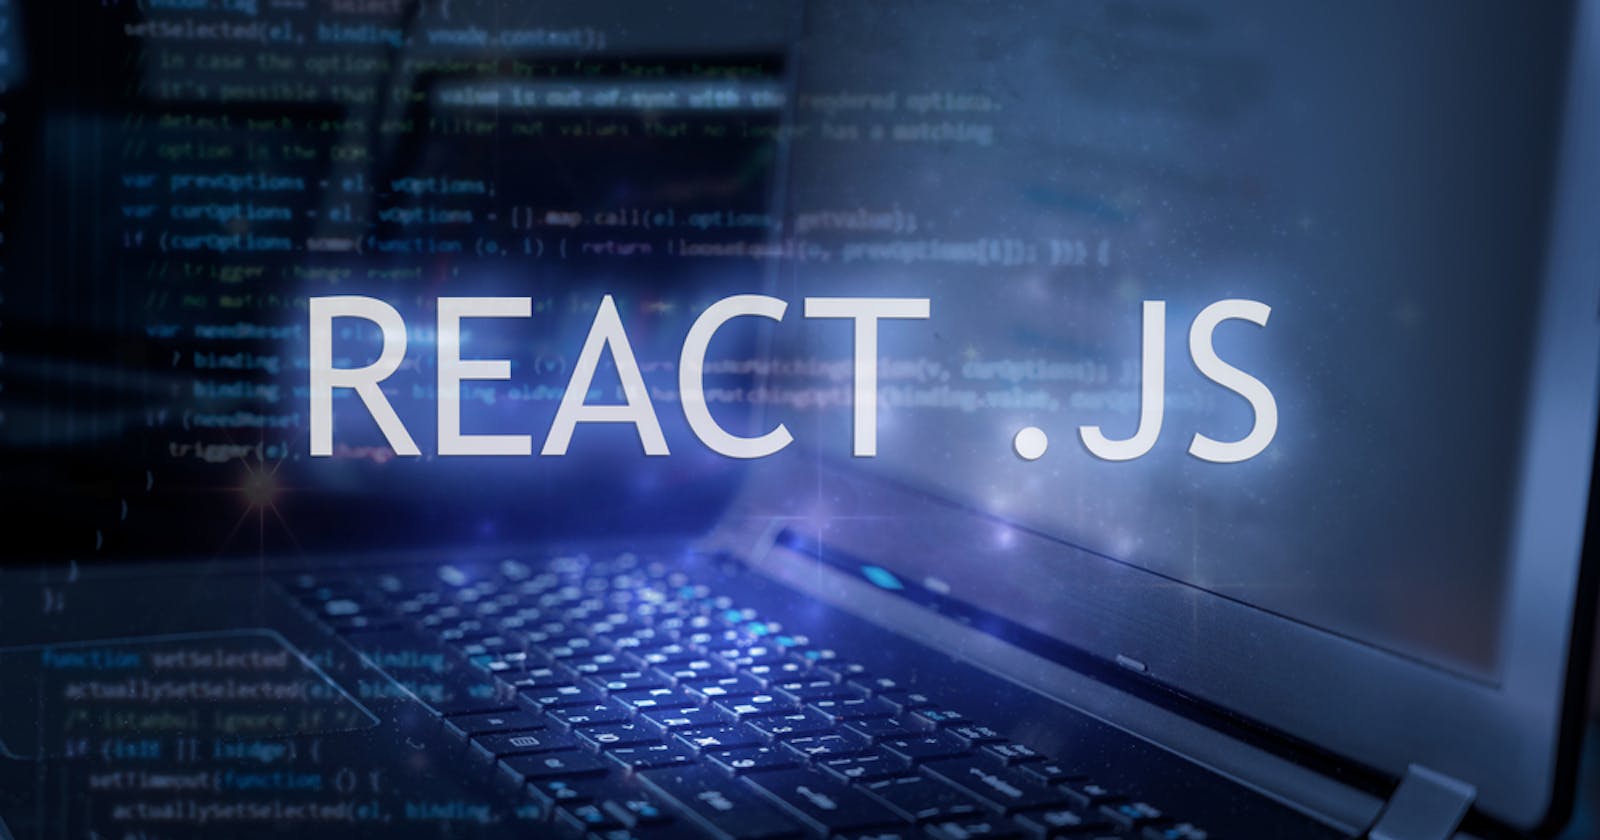 Key Skills to Look for When Hiring a React JS Developer